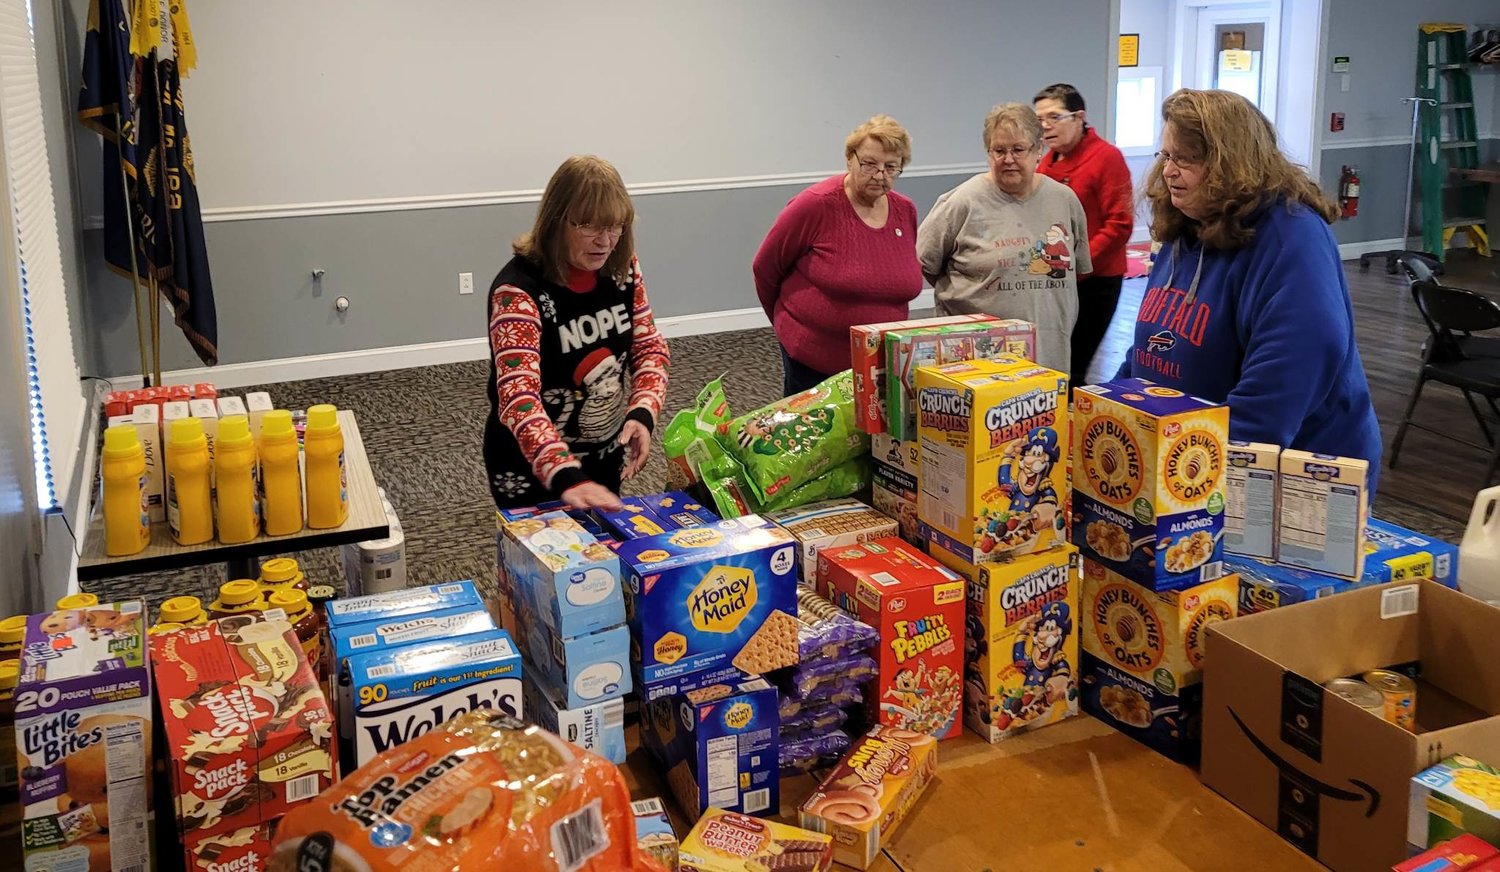 Sorting items recently for their Fill Um Up Project are, from left, Oneida American Legion Auxiliary Vice President Sue Fid, auxiliary Secretary Pauline Gormley and auxiliary members Patti White, Tracey Collins and Janet Zimmerman.